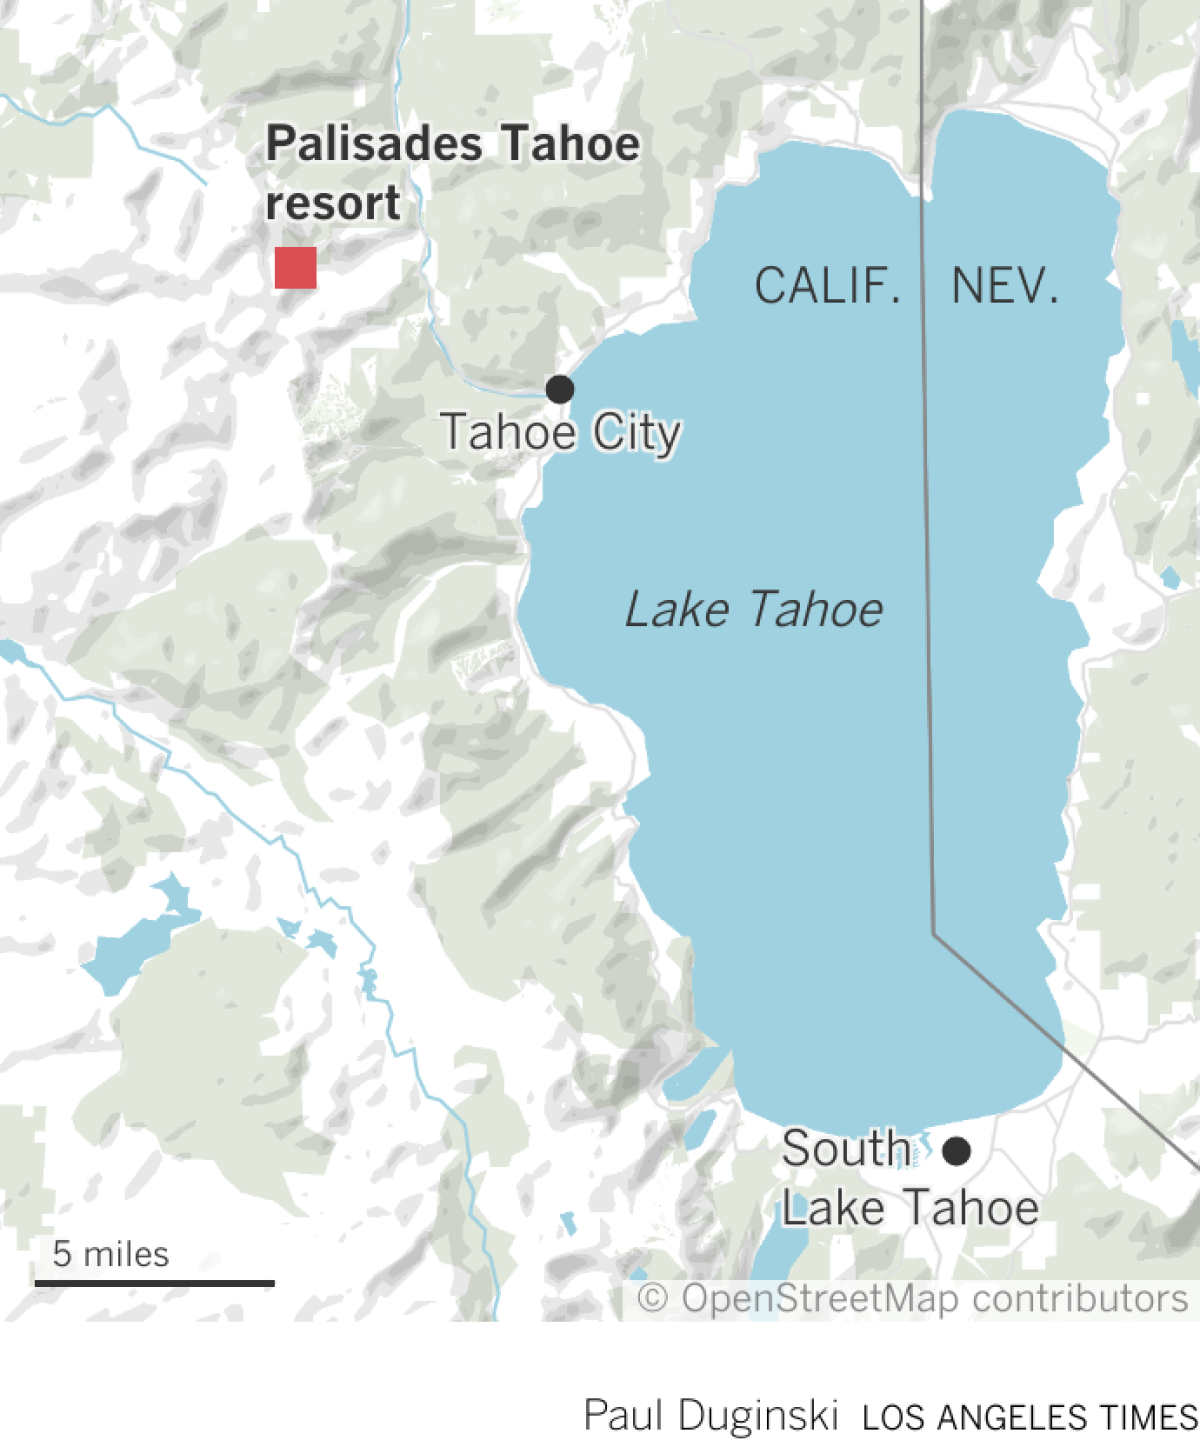 Locator map of Palisades Tahoe resort, where avalanche occurred.